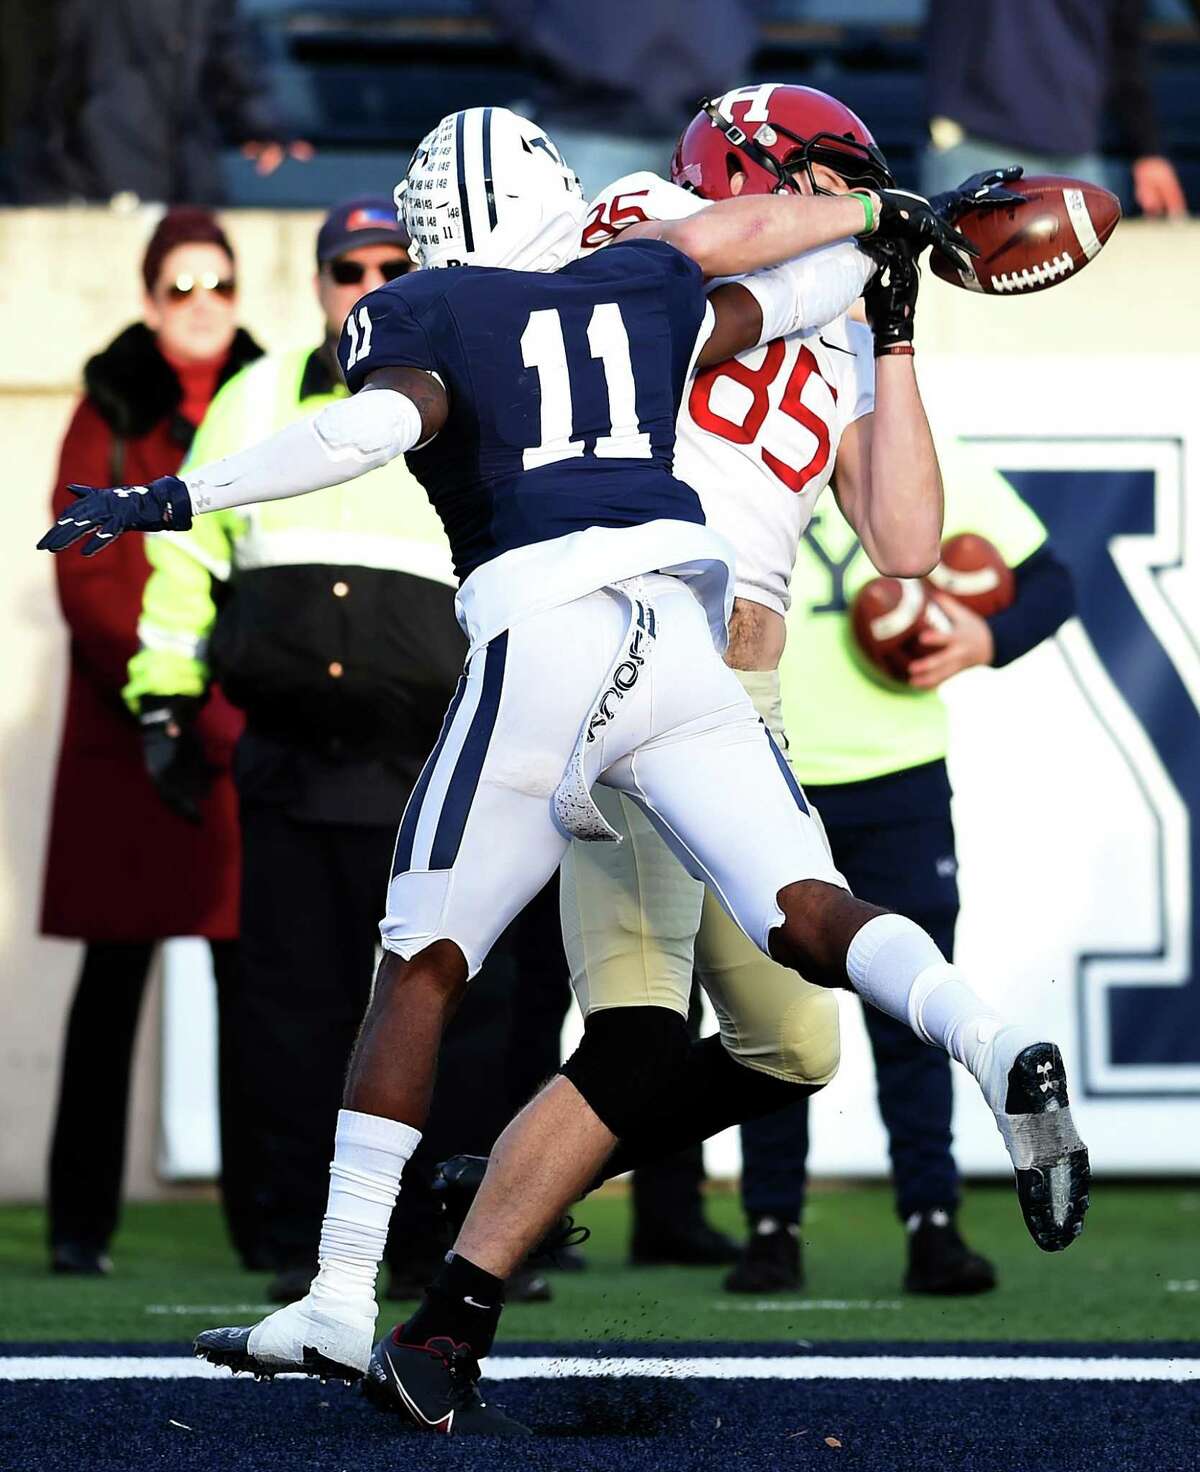 Dathan Hickey of Yale breaks up a pass intended for Adam West of Harvard at the Yale Bowl in New Haven, Connecticut, on November 20, 2021.